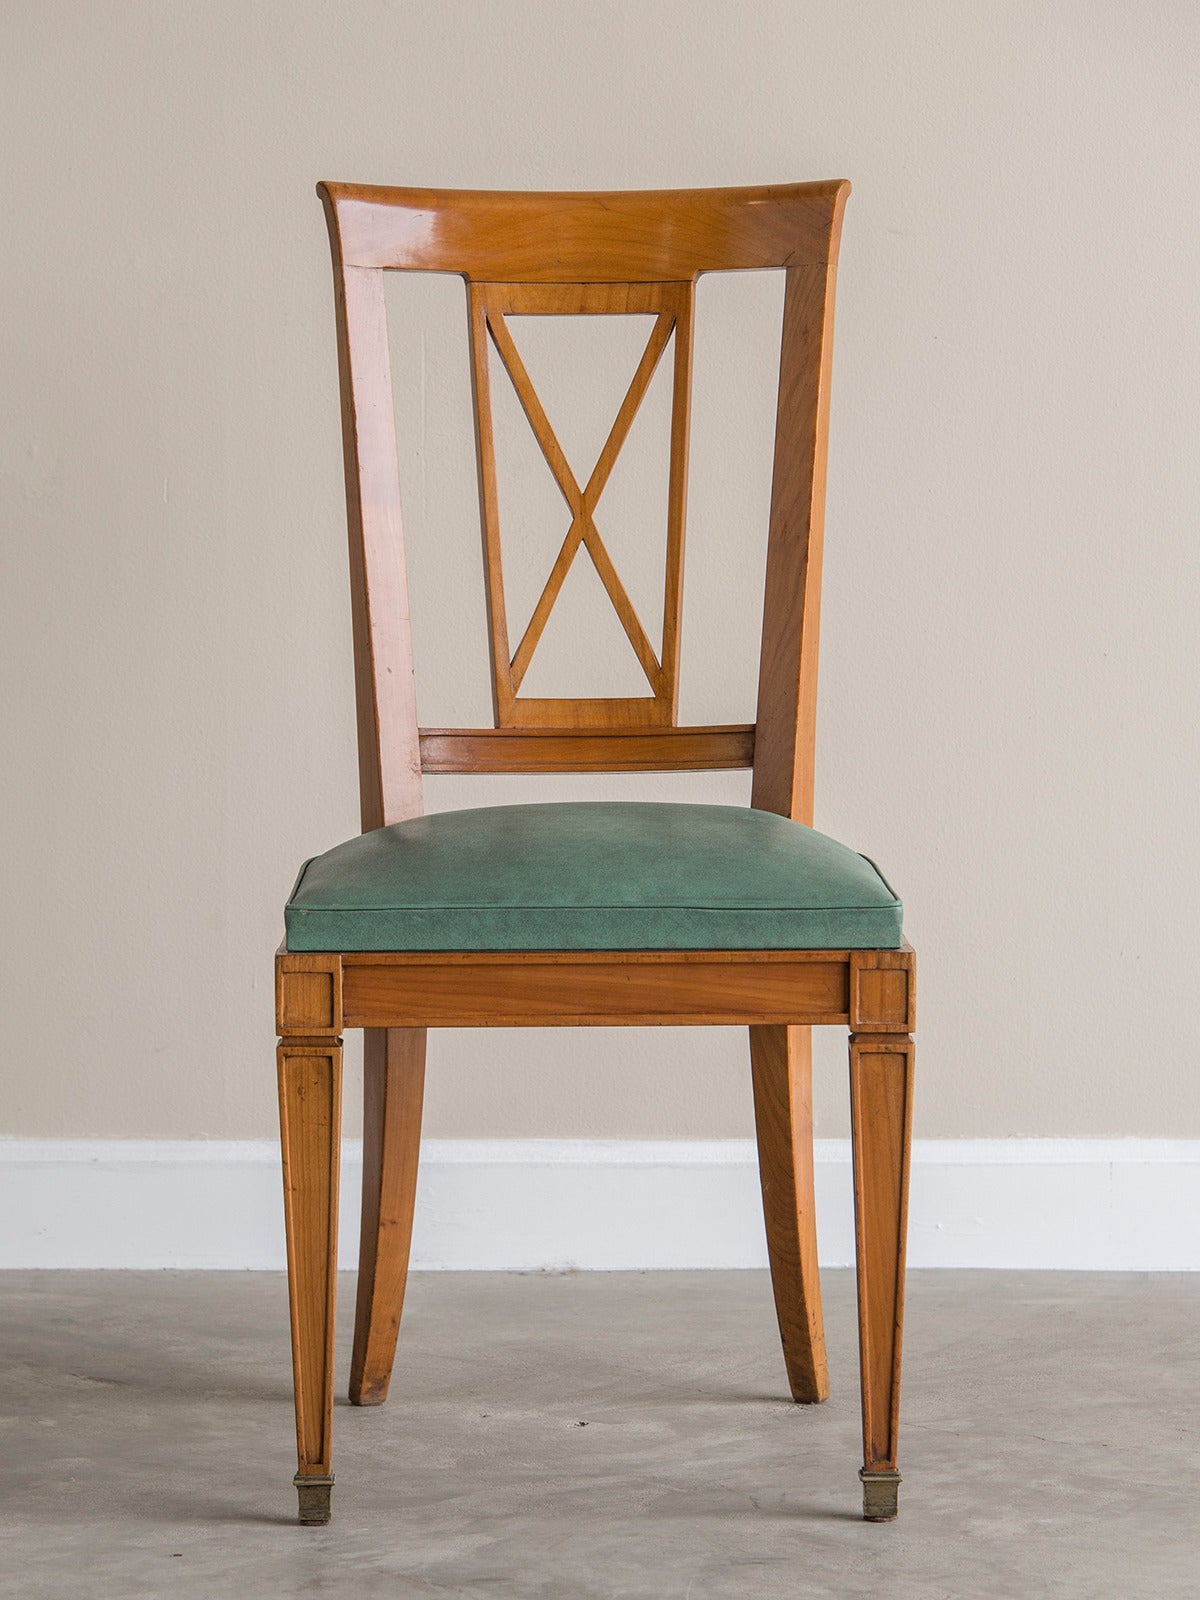 French Art Deco set six cherry chairs, France, circa 1930. The tall and slender lines of these chairs conjures up the power of neoclassical taste developed at the end of the 18th century when refinement and purity of detail were paramount values.